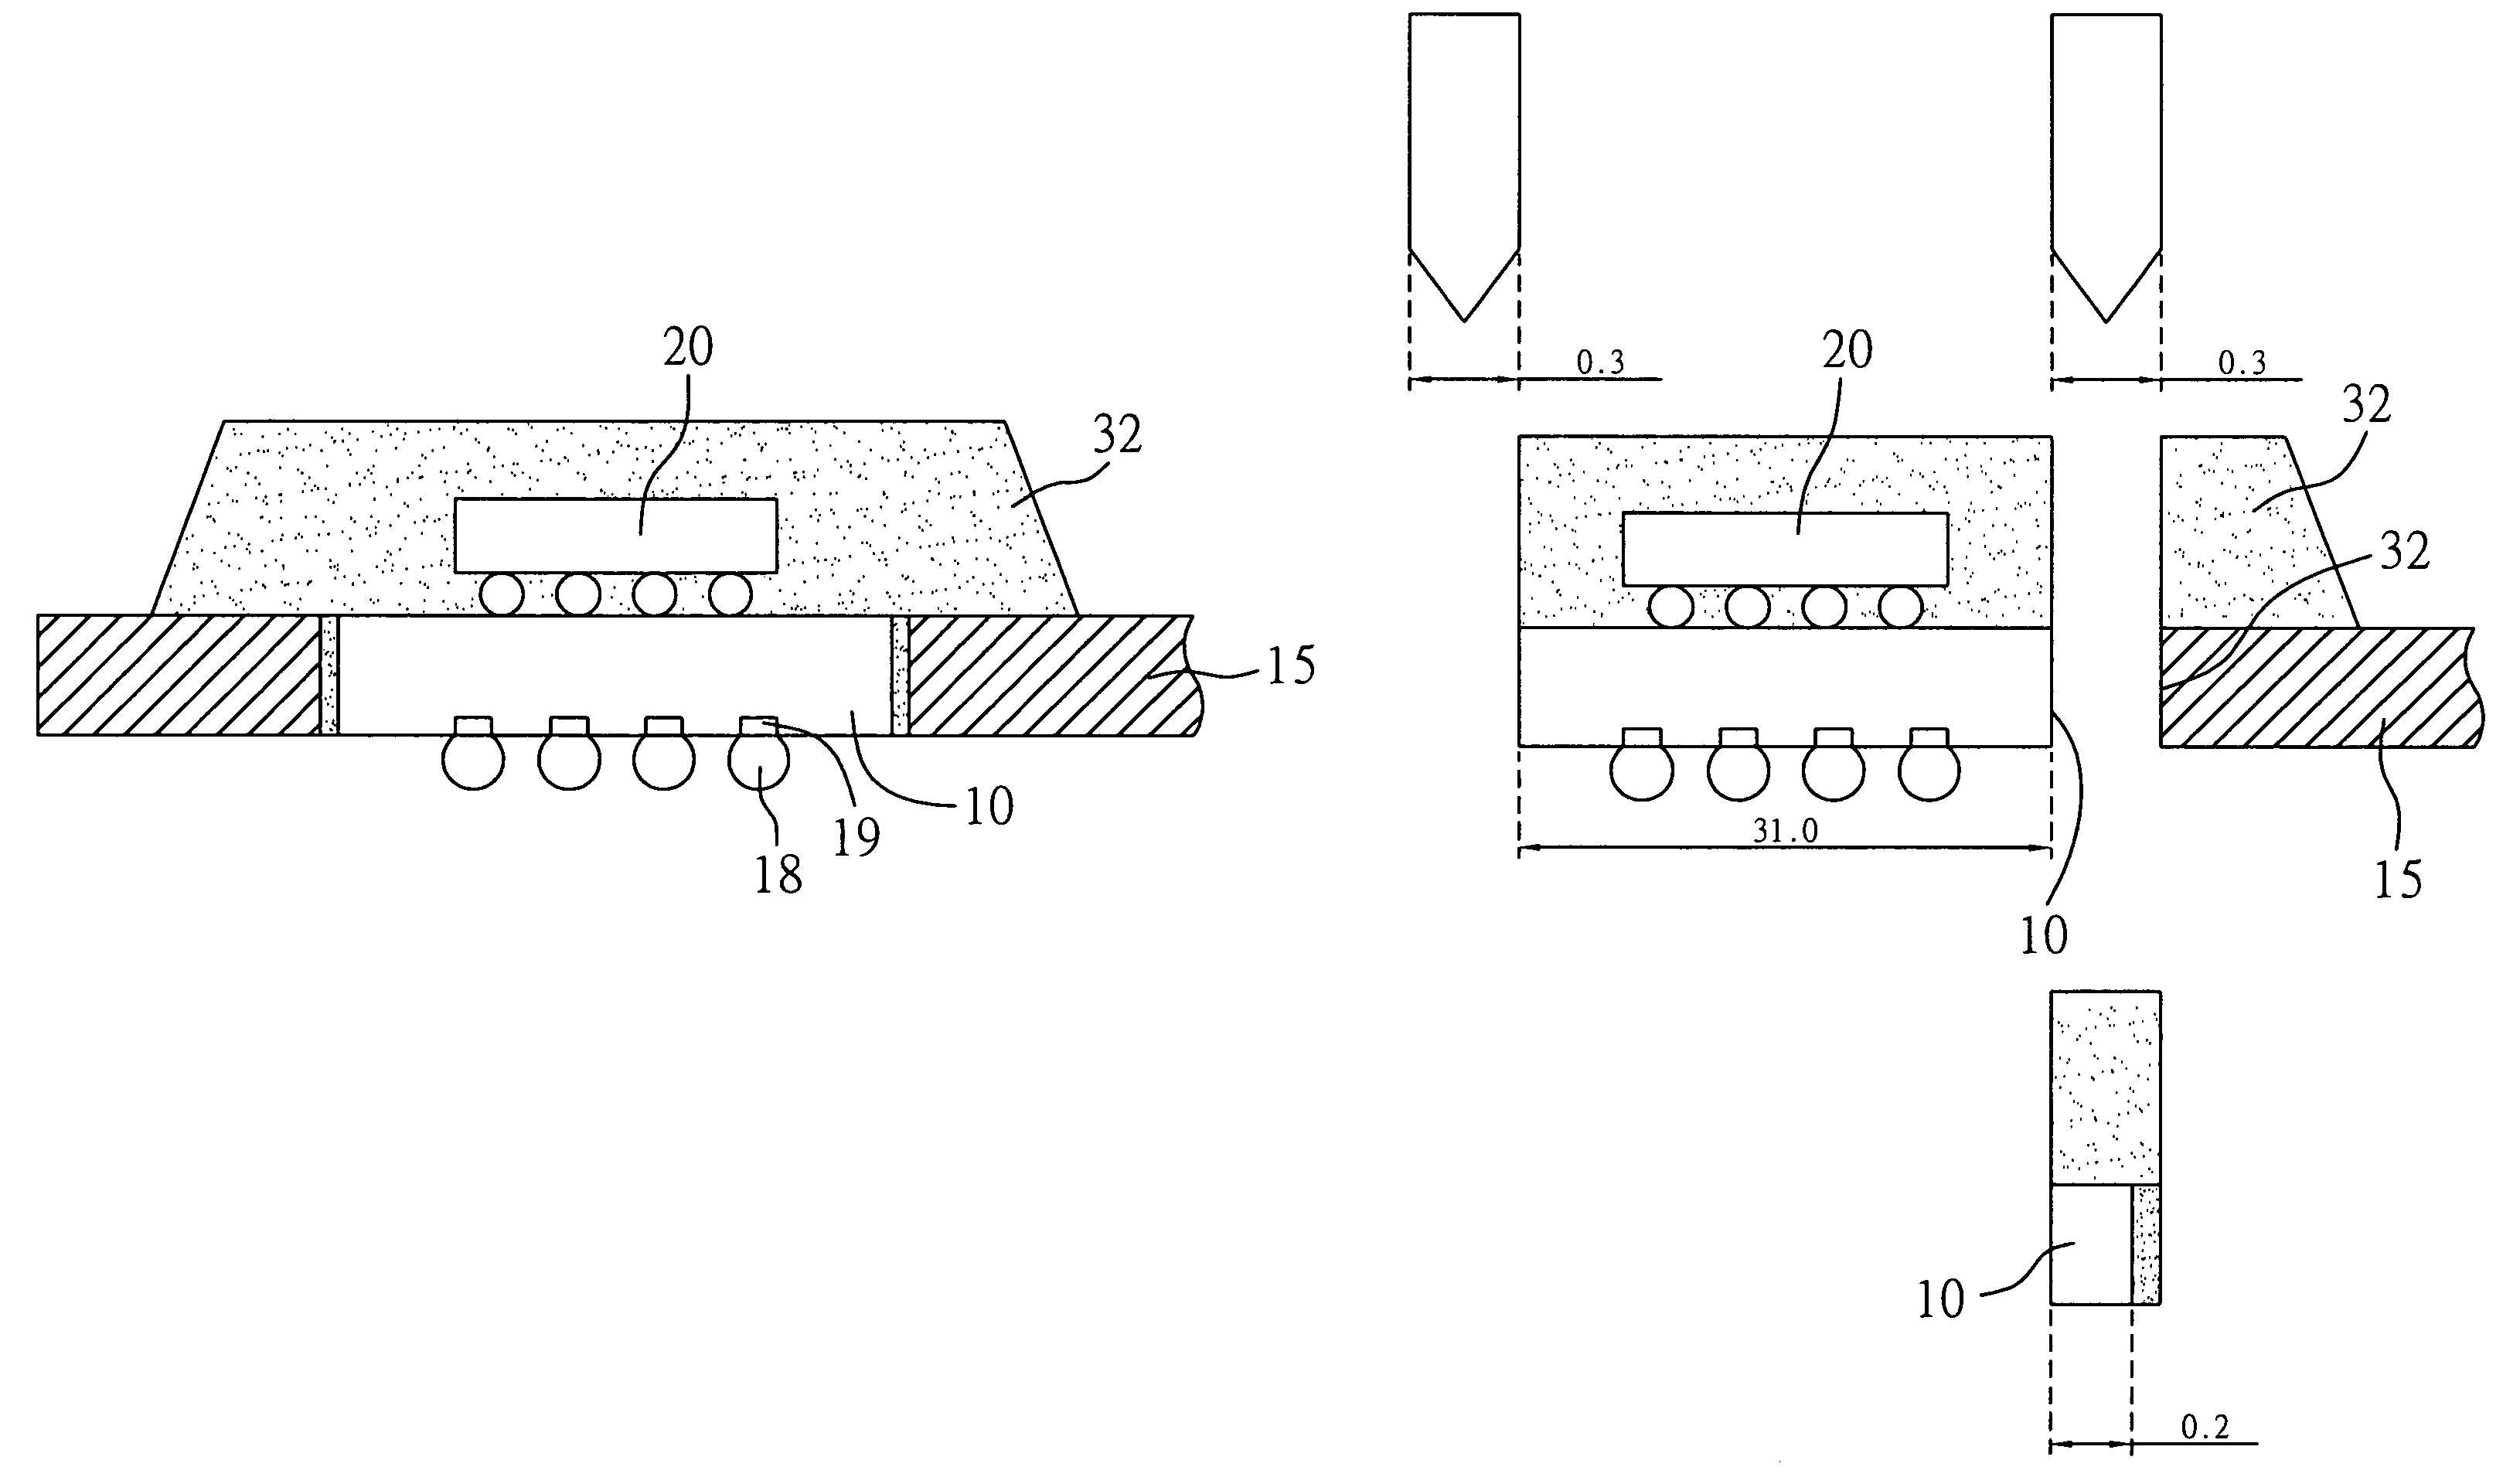 Method for fabricating semiconductor packages